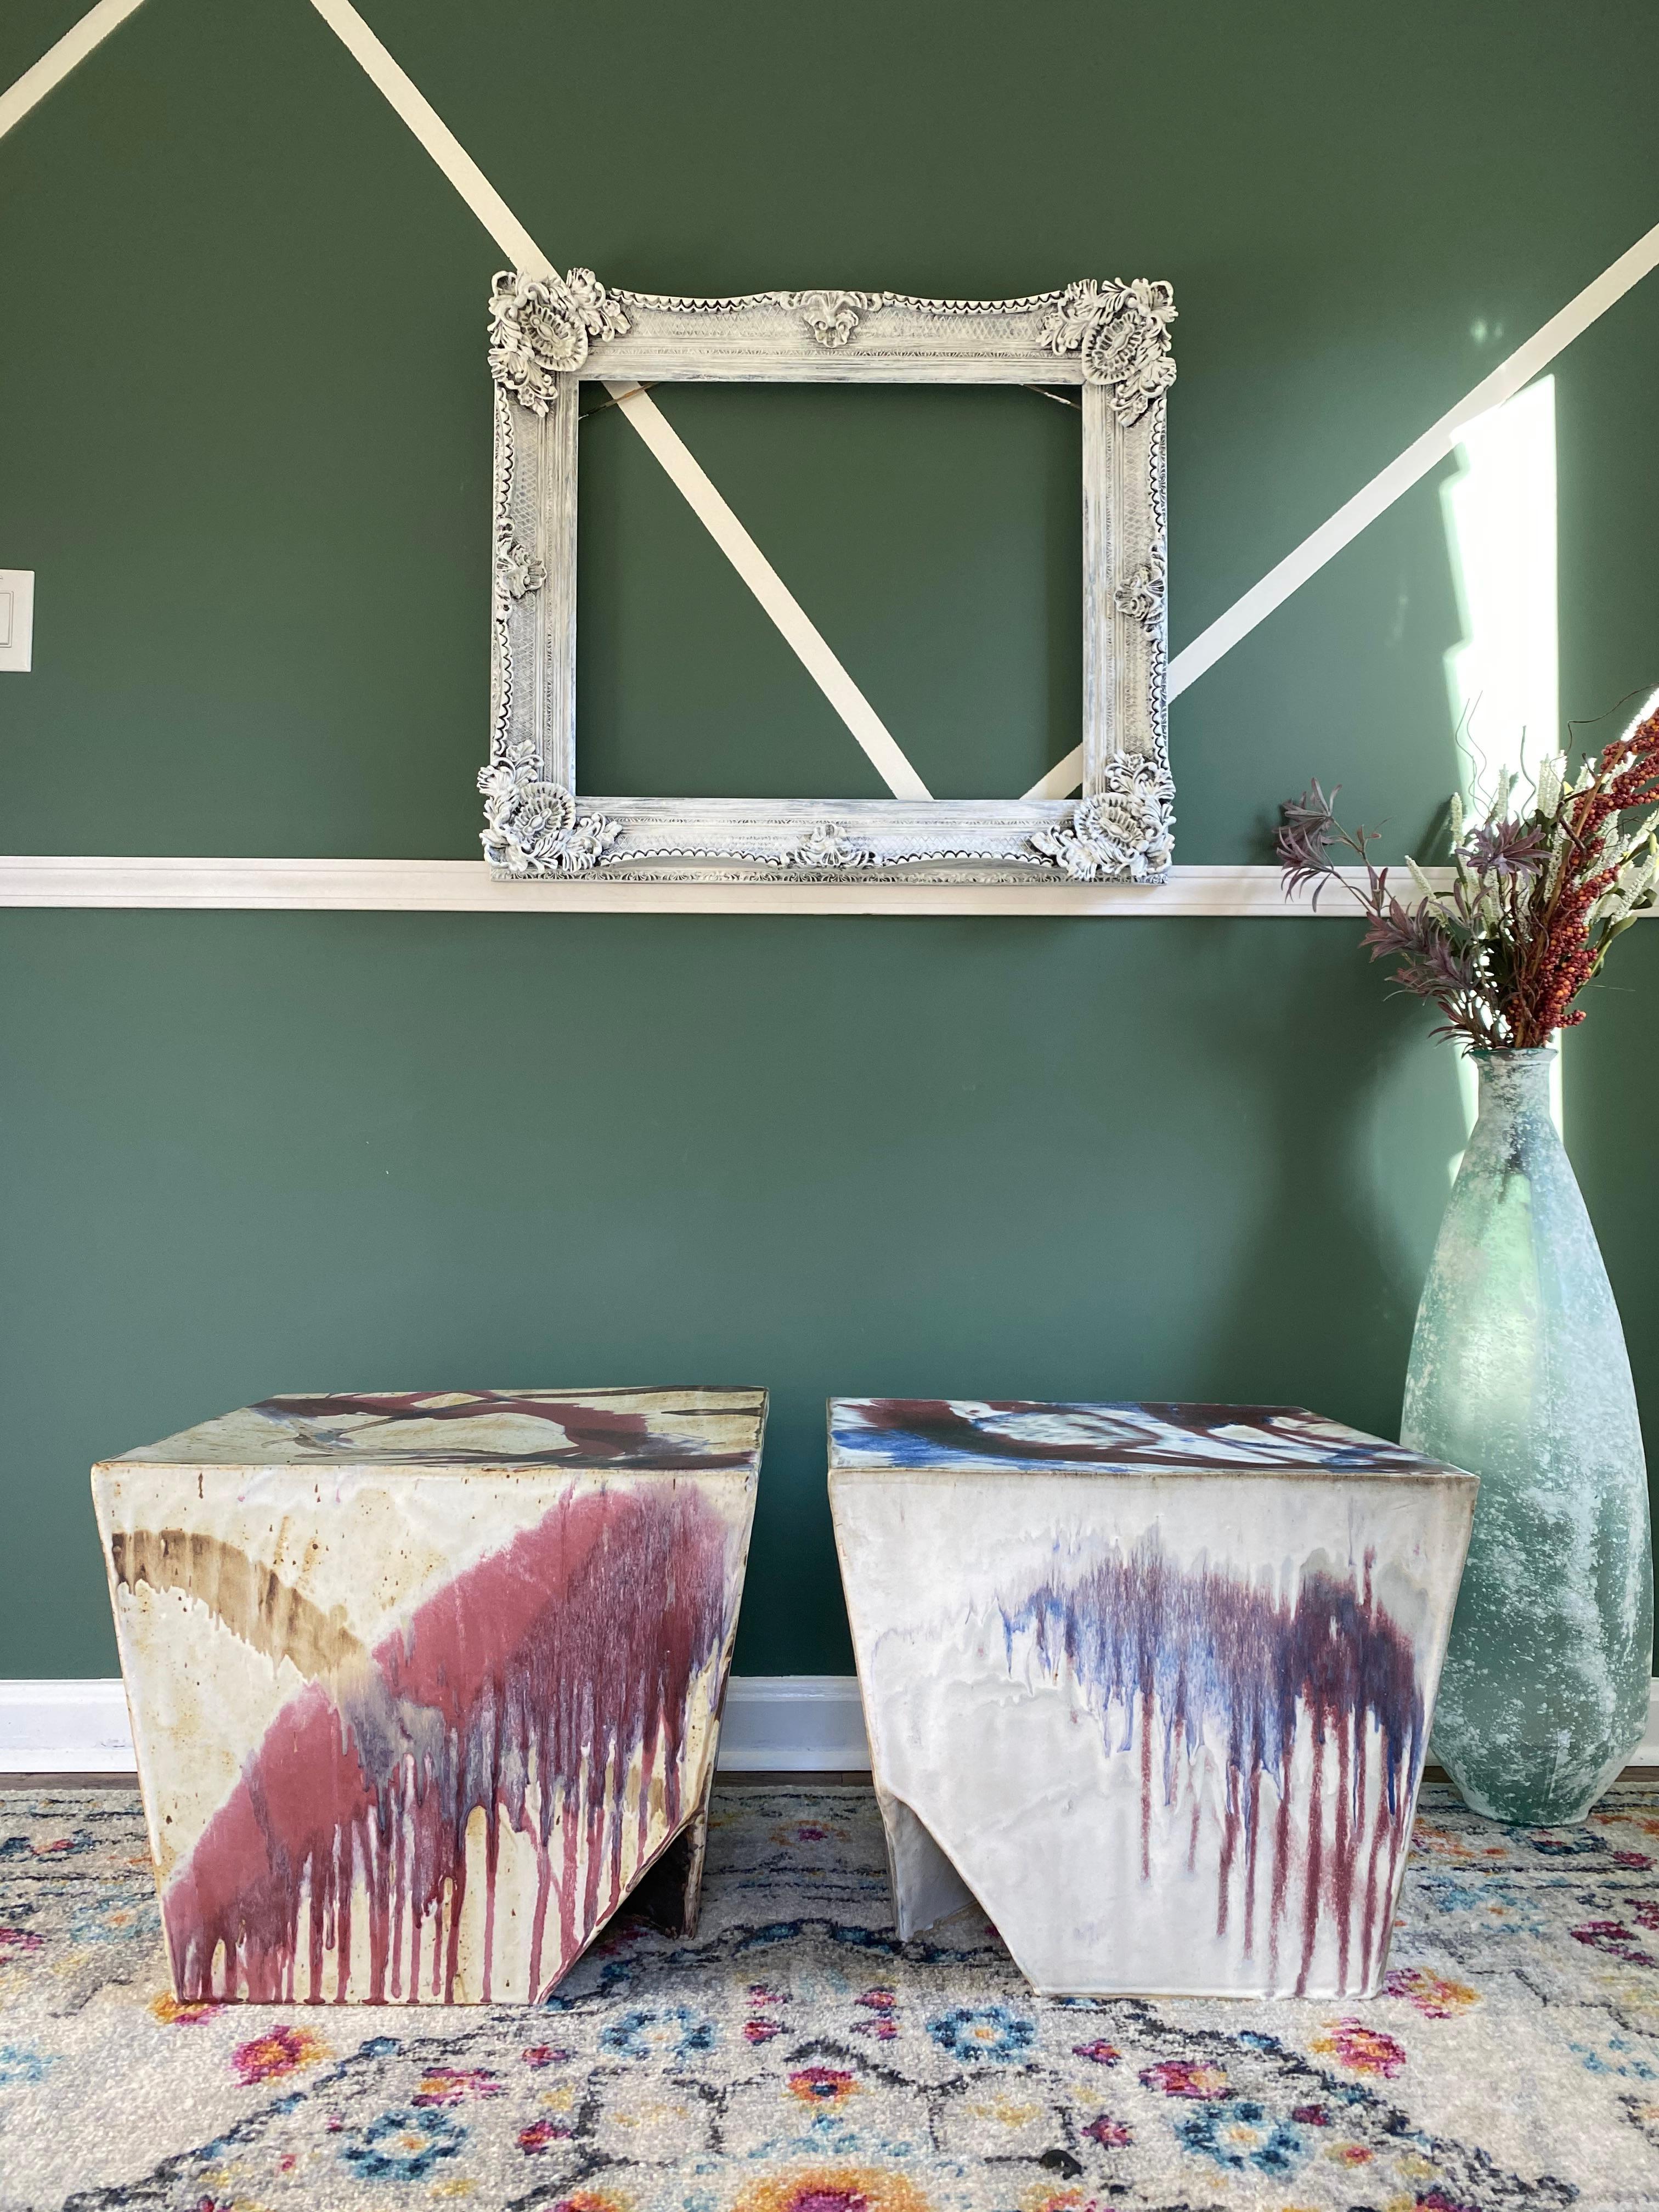 Amazing pair of vintage abstract ceramic plinth stools or side tables. They are in great condition, only holds scratches due to age, please see photos. The stools/side tables do have a bit of a difference in color, which are shown in the photos. The